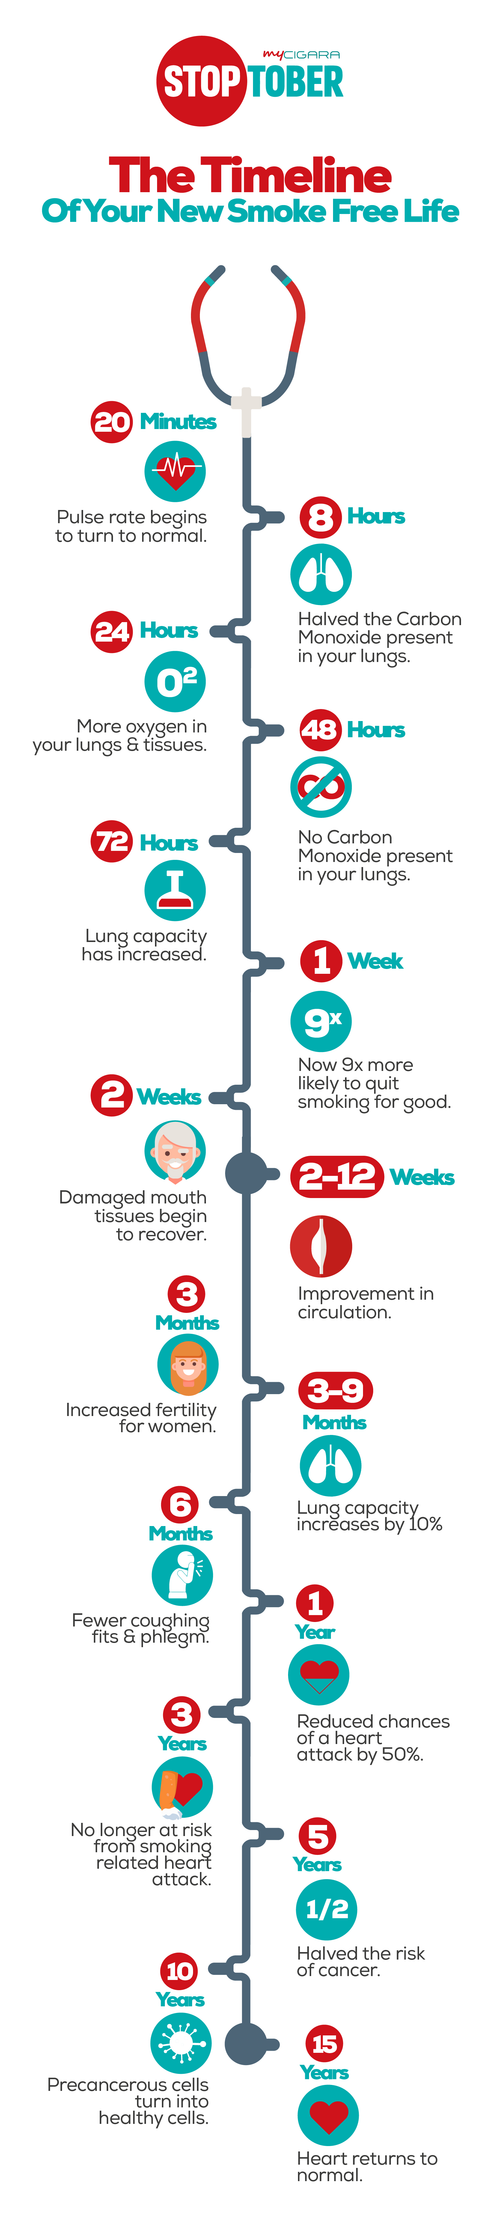 A Smoker's Road to Recovery - University of Utah Health